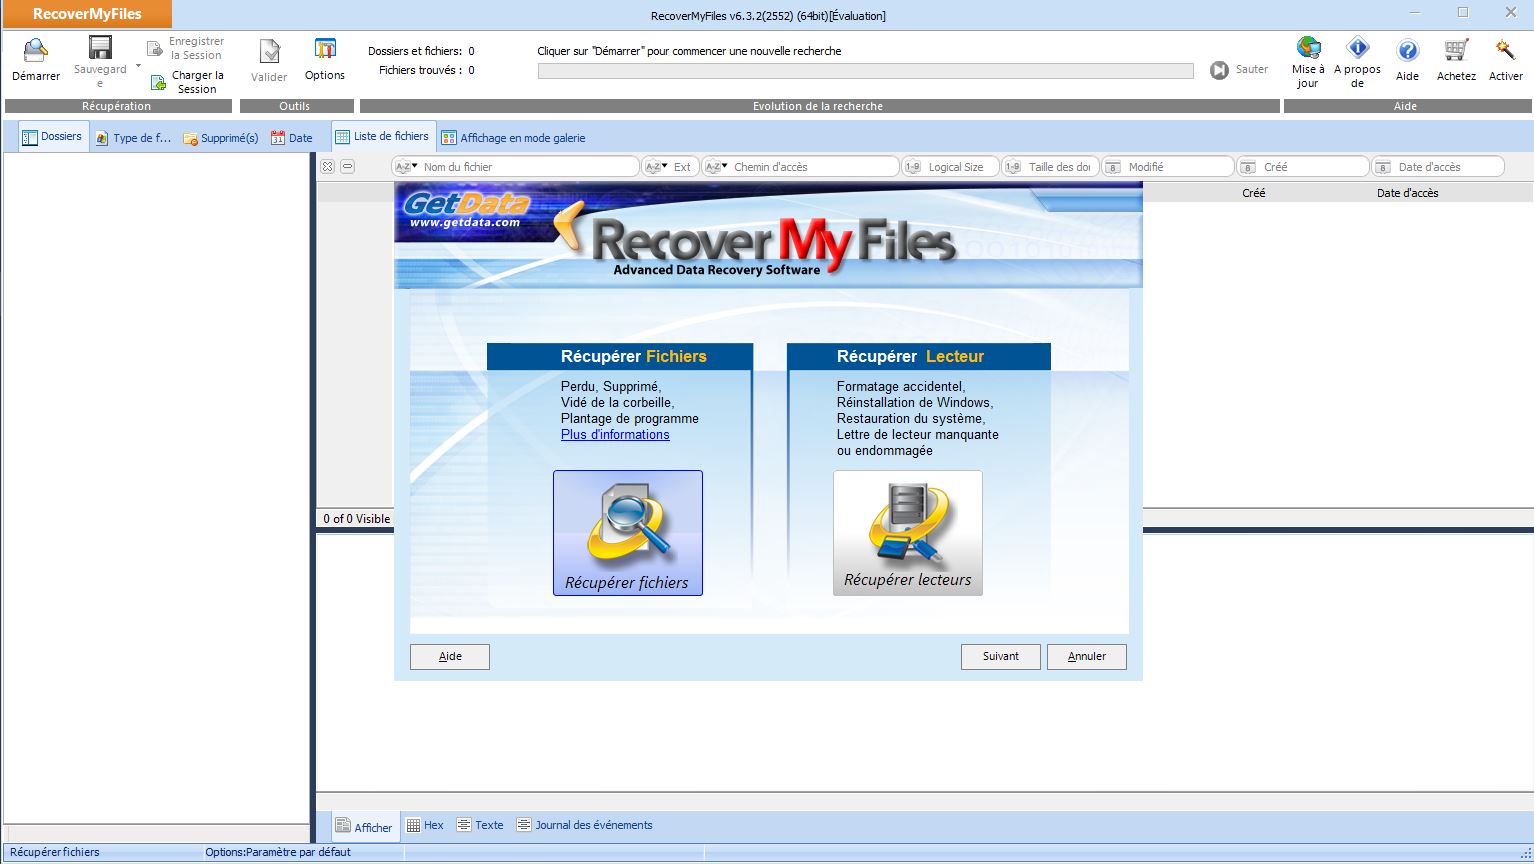 Https my files ru. Recover my files. Recover my files v4. Recovery my files. Recover my files v5 активация.